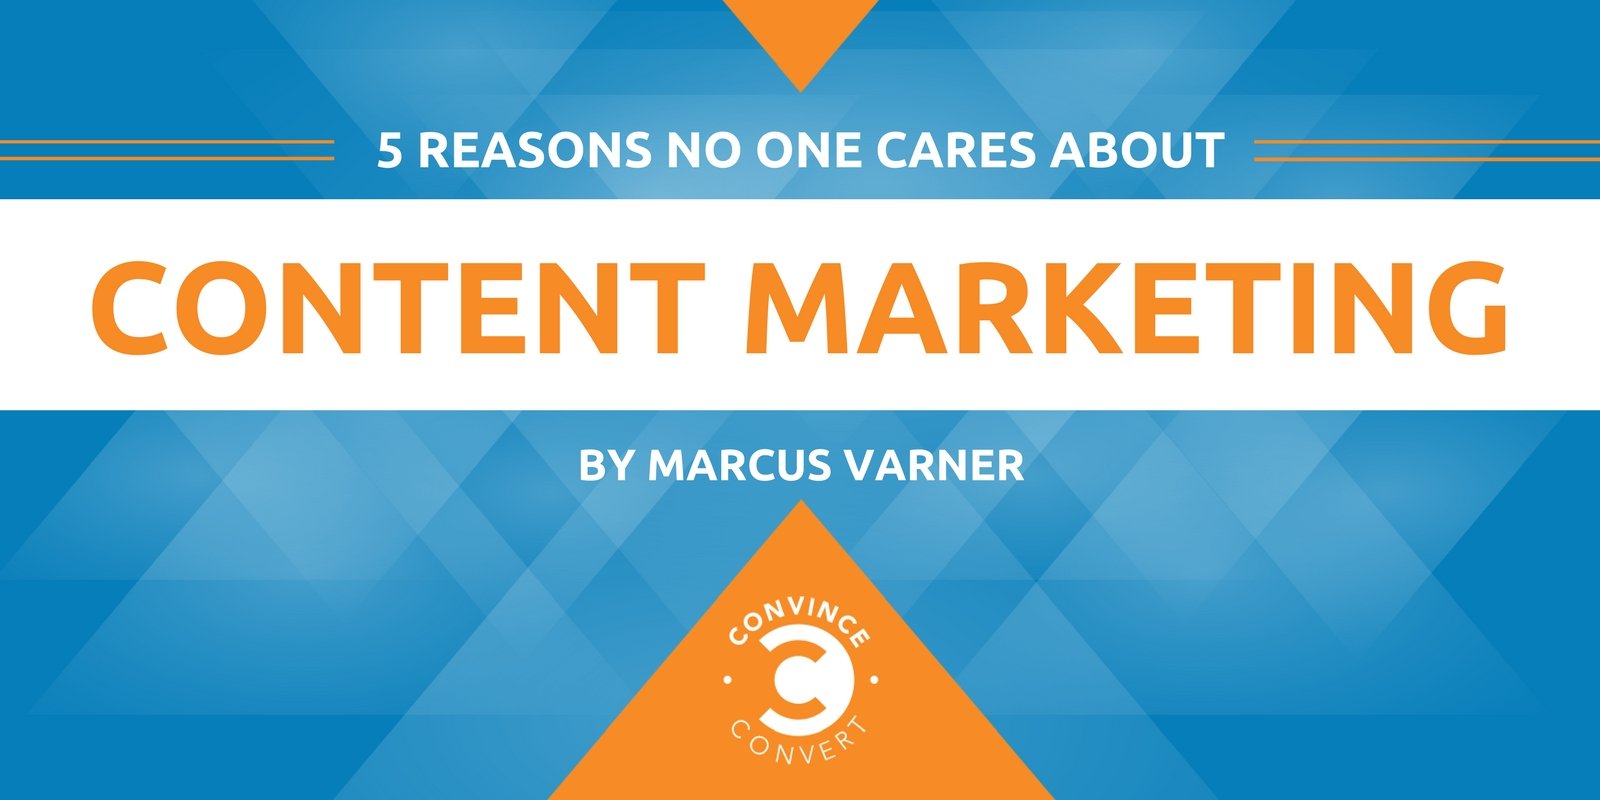 5 Reasons No One Cares About Content Marketing